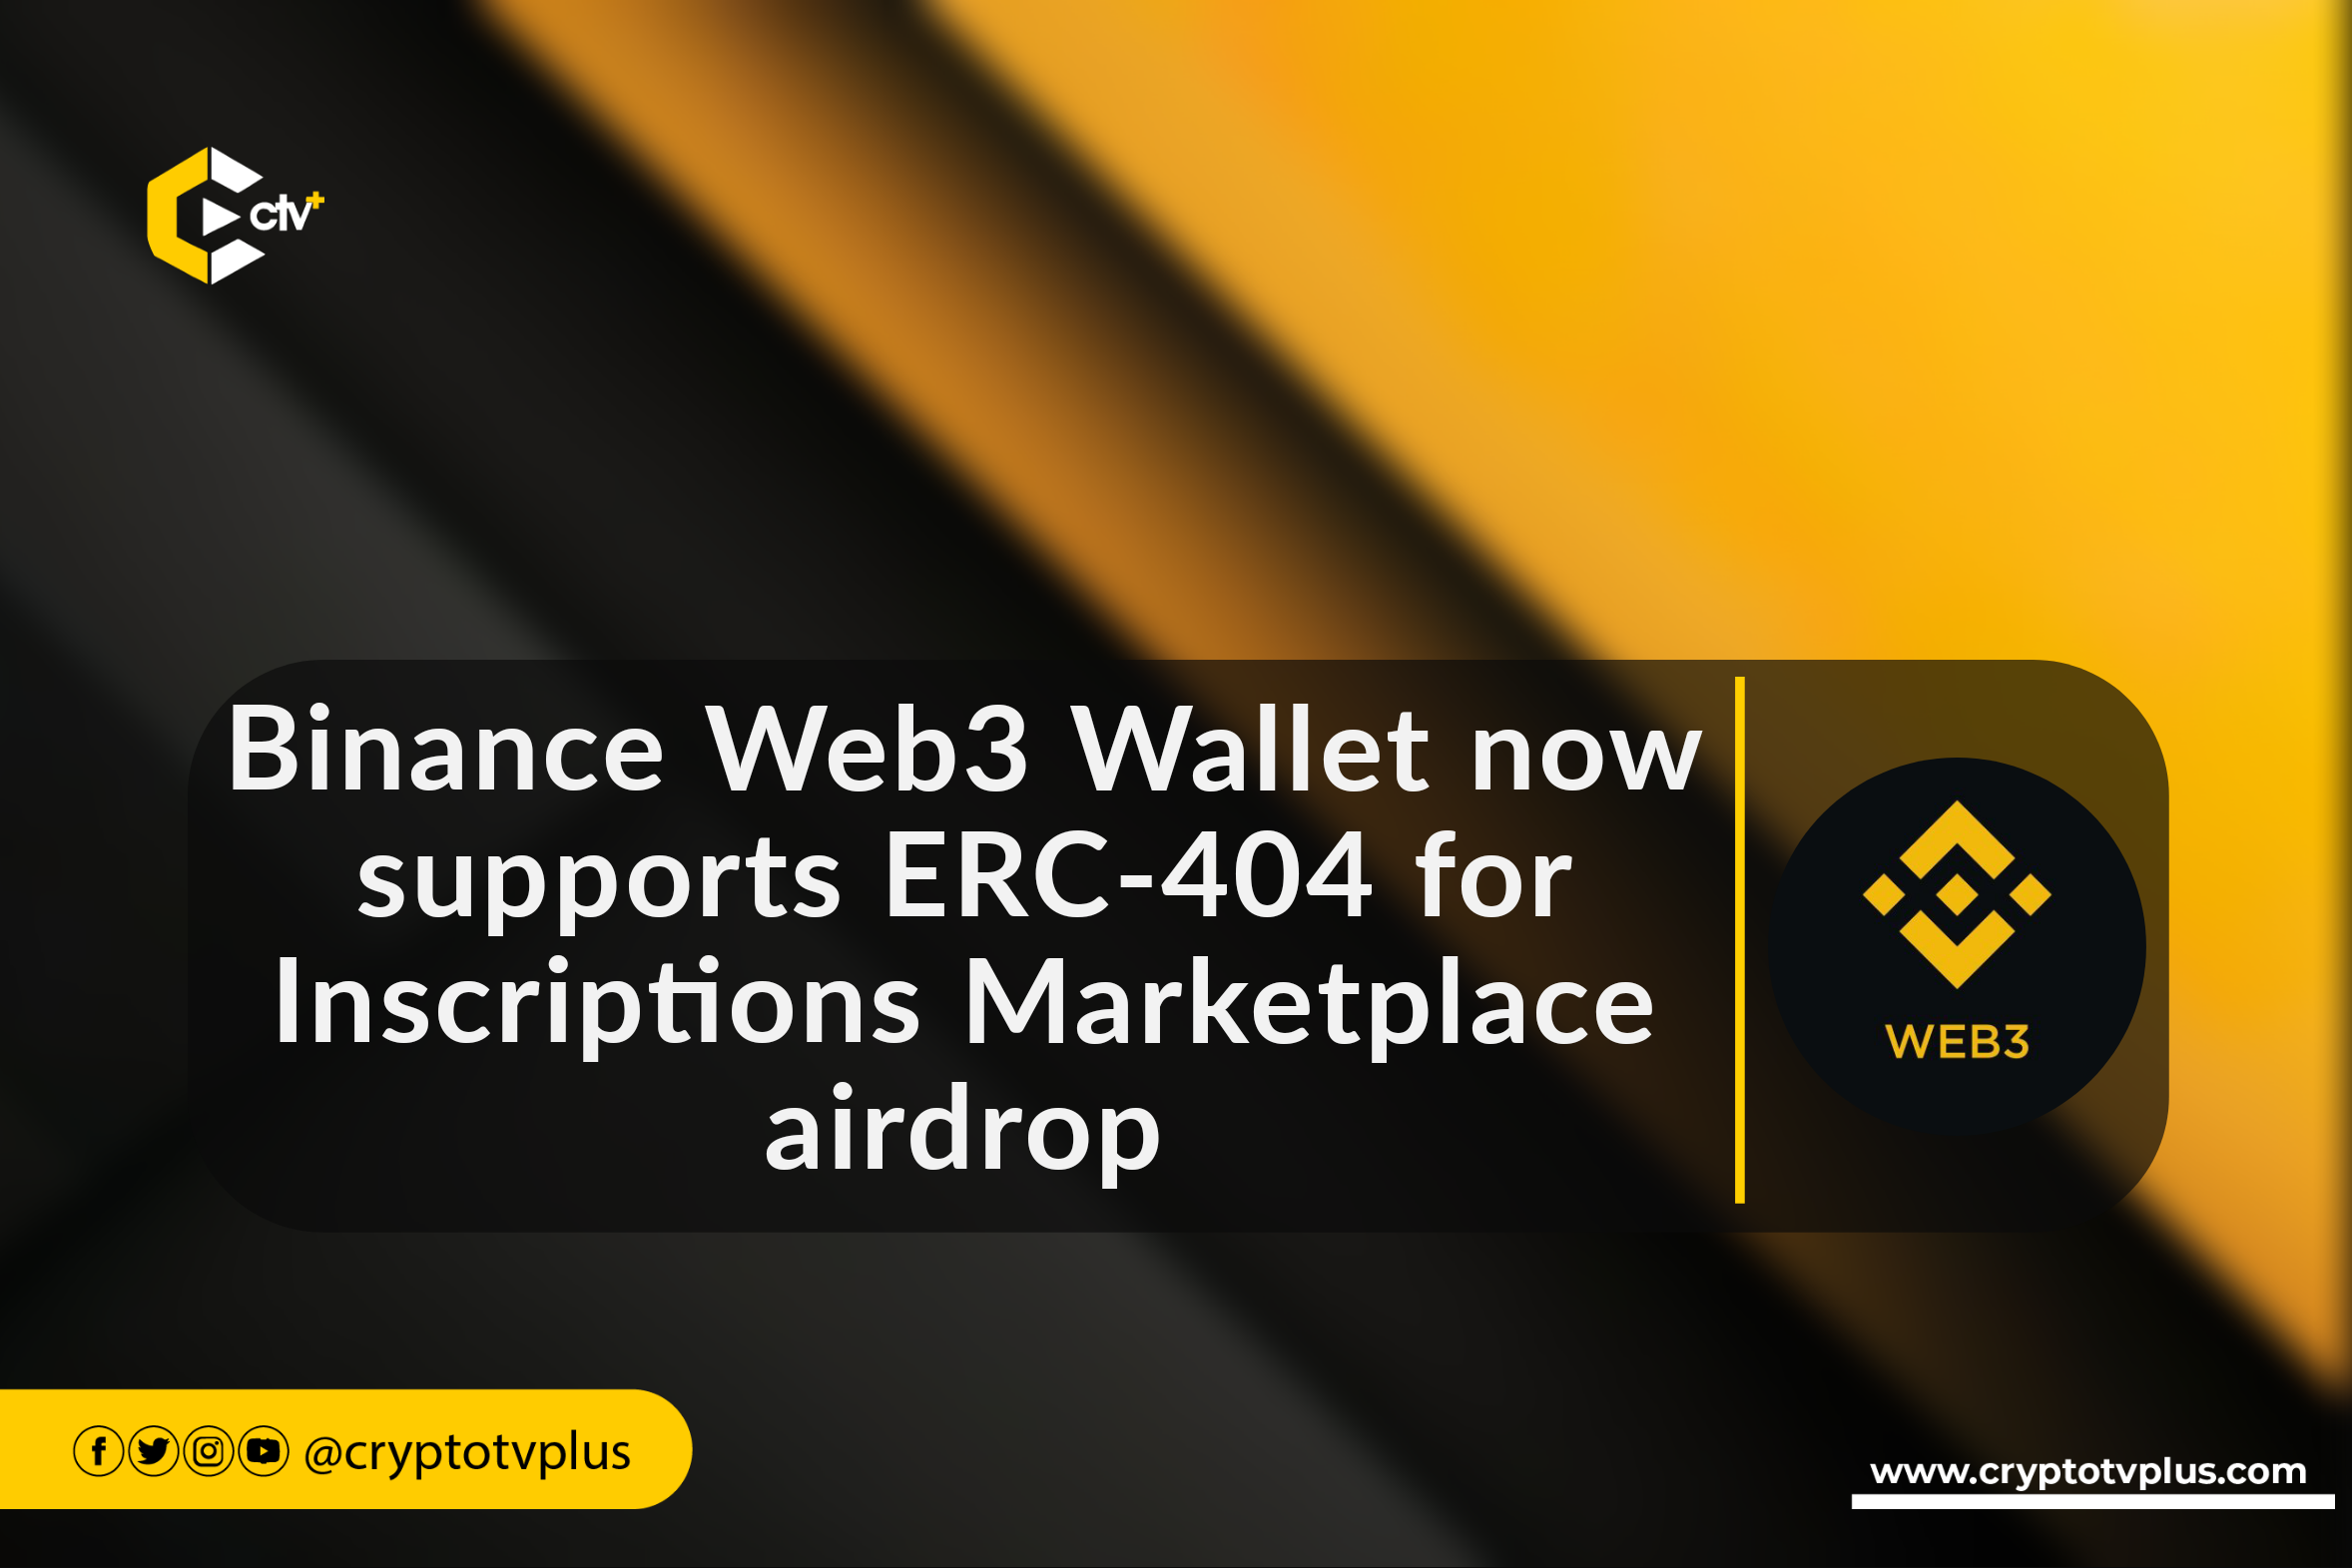 Binance Web3 Wallet now supports ERC-404 for Inscriptions Marketplace airdrop